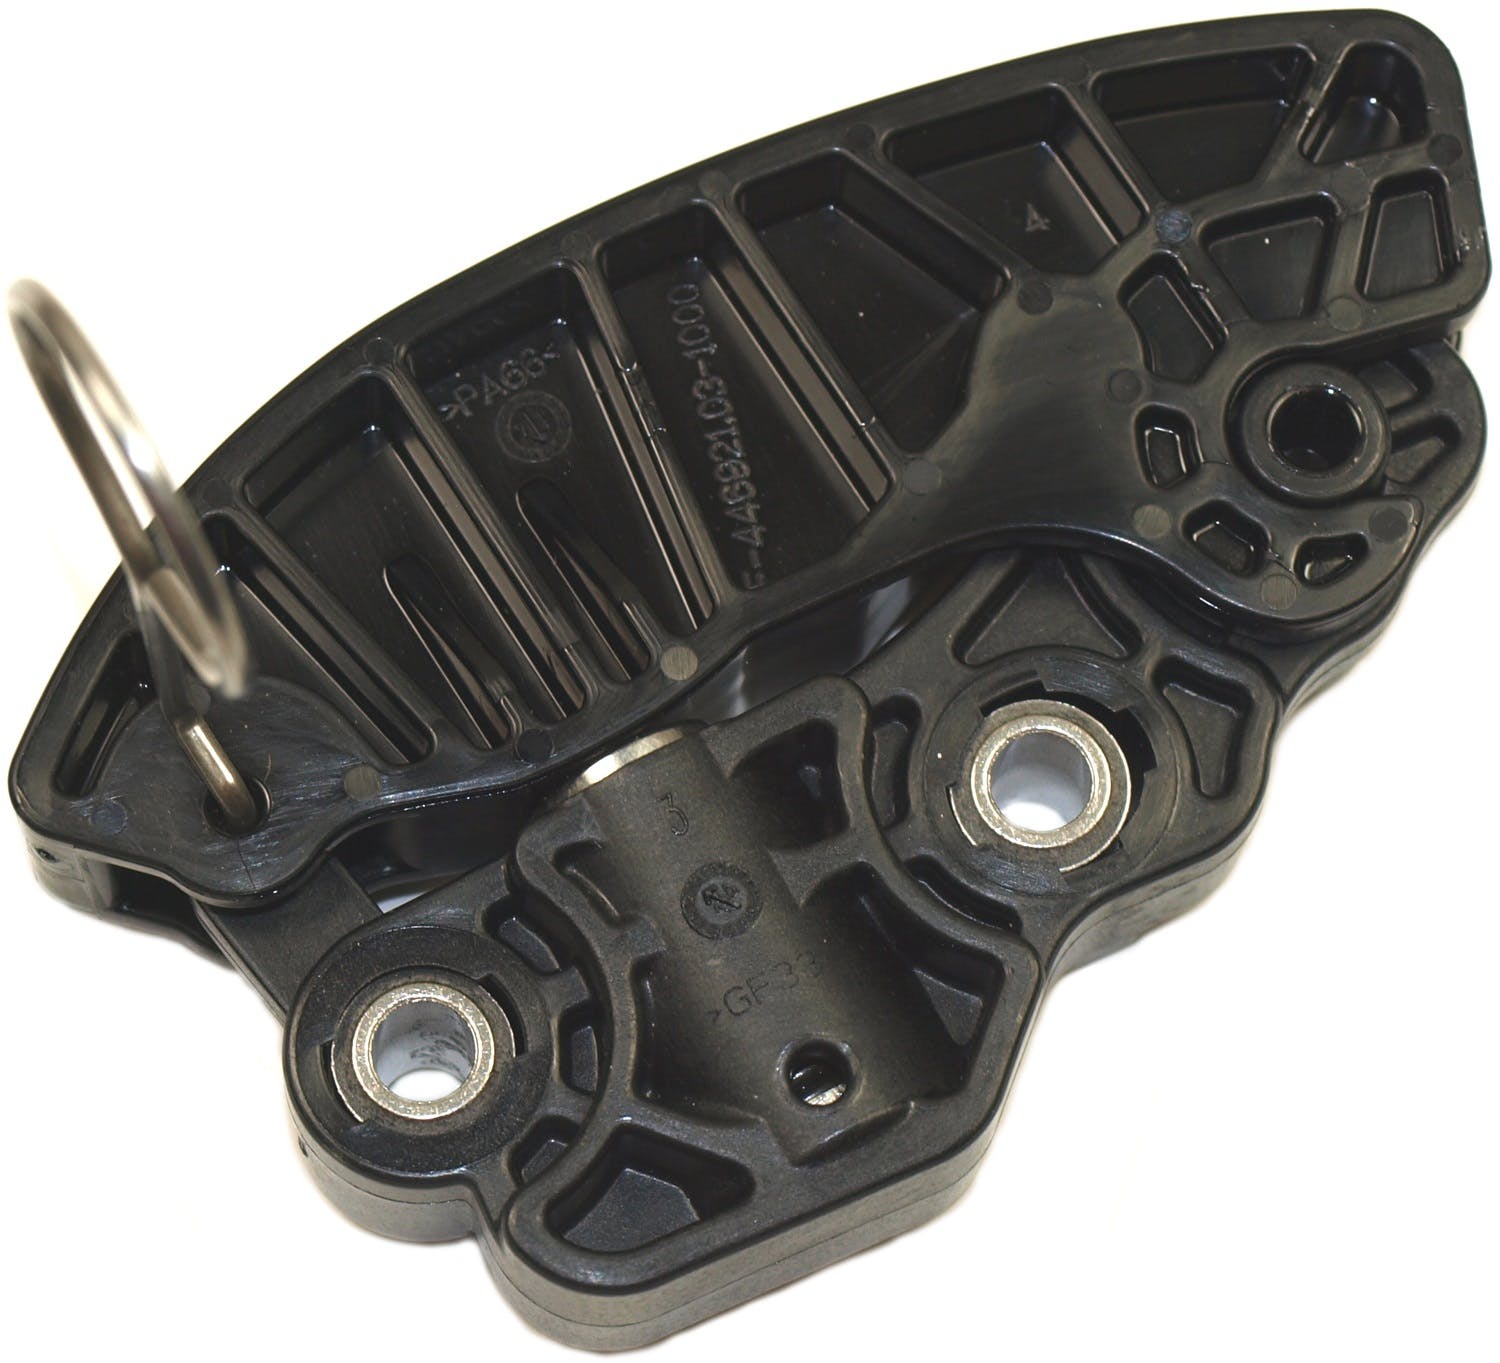 Cloyes 9-5598 Engine Timing Chain Tensioner Engine Timing Chain Tensioner